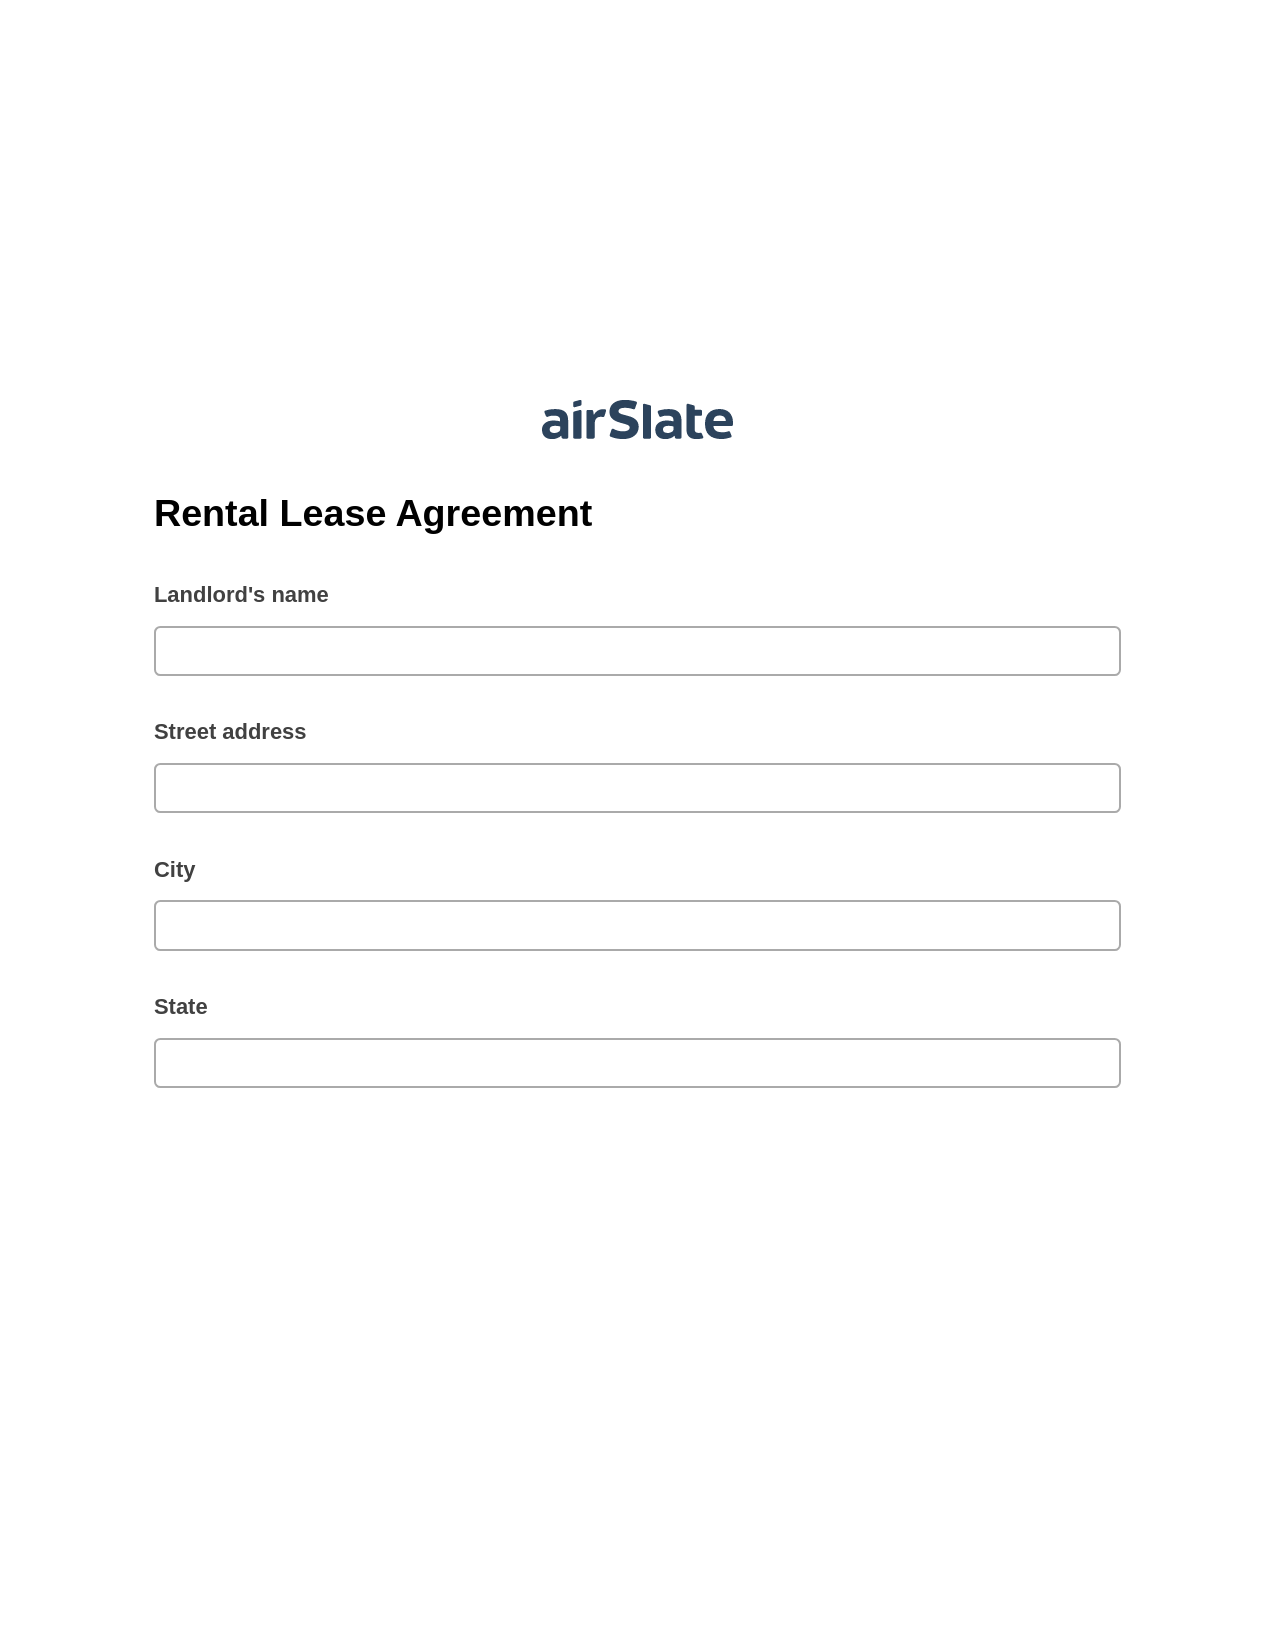 Multirole Rental Lease Agreement Pre-fill from MySQL Dropdown Options Bot, Update MS Dynamics 365 Record Bot, Email Notification Postfinish Bot